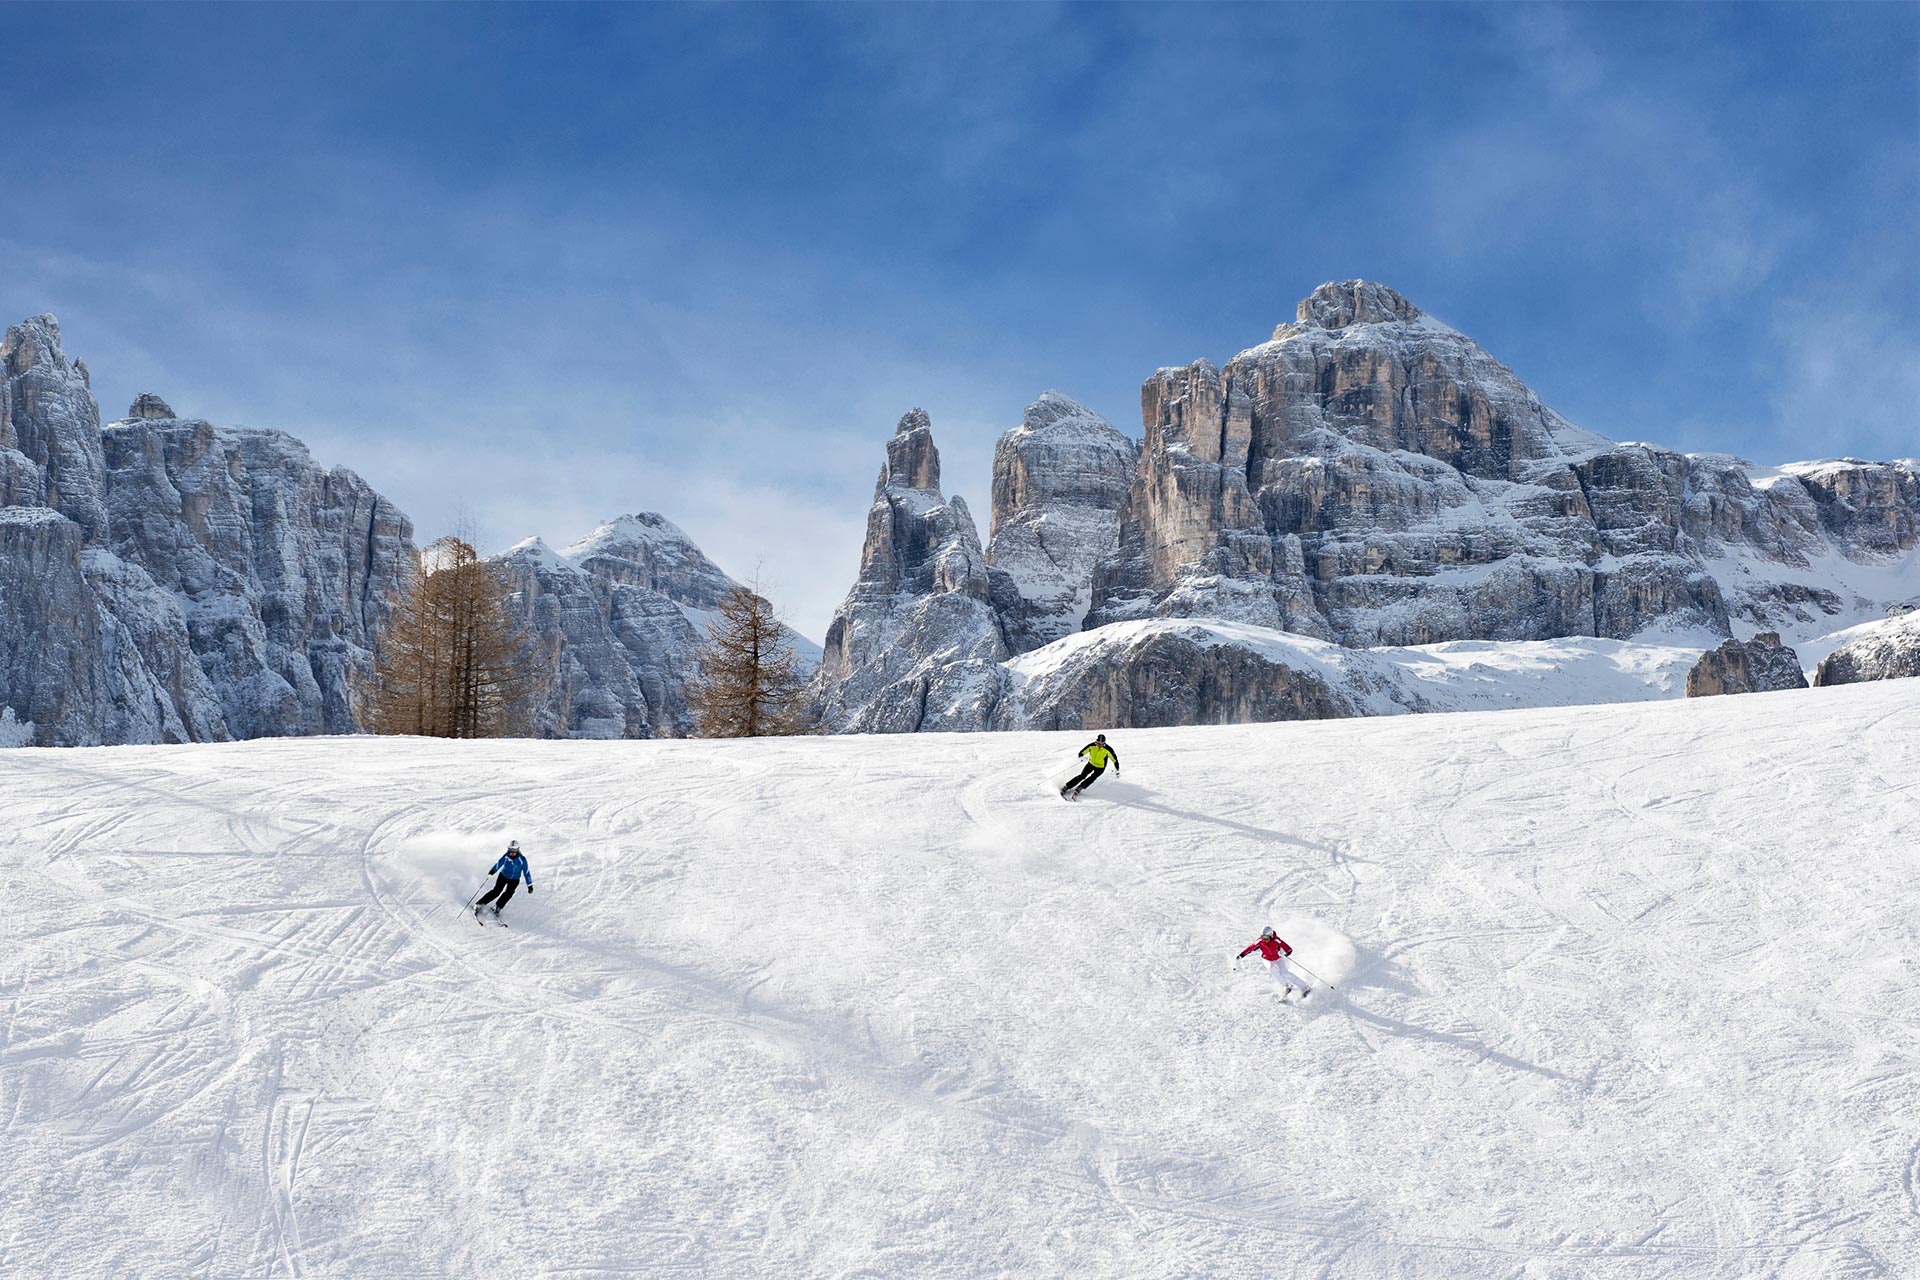 Excursion with a breathtaking landscape in Alta Badia